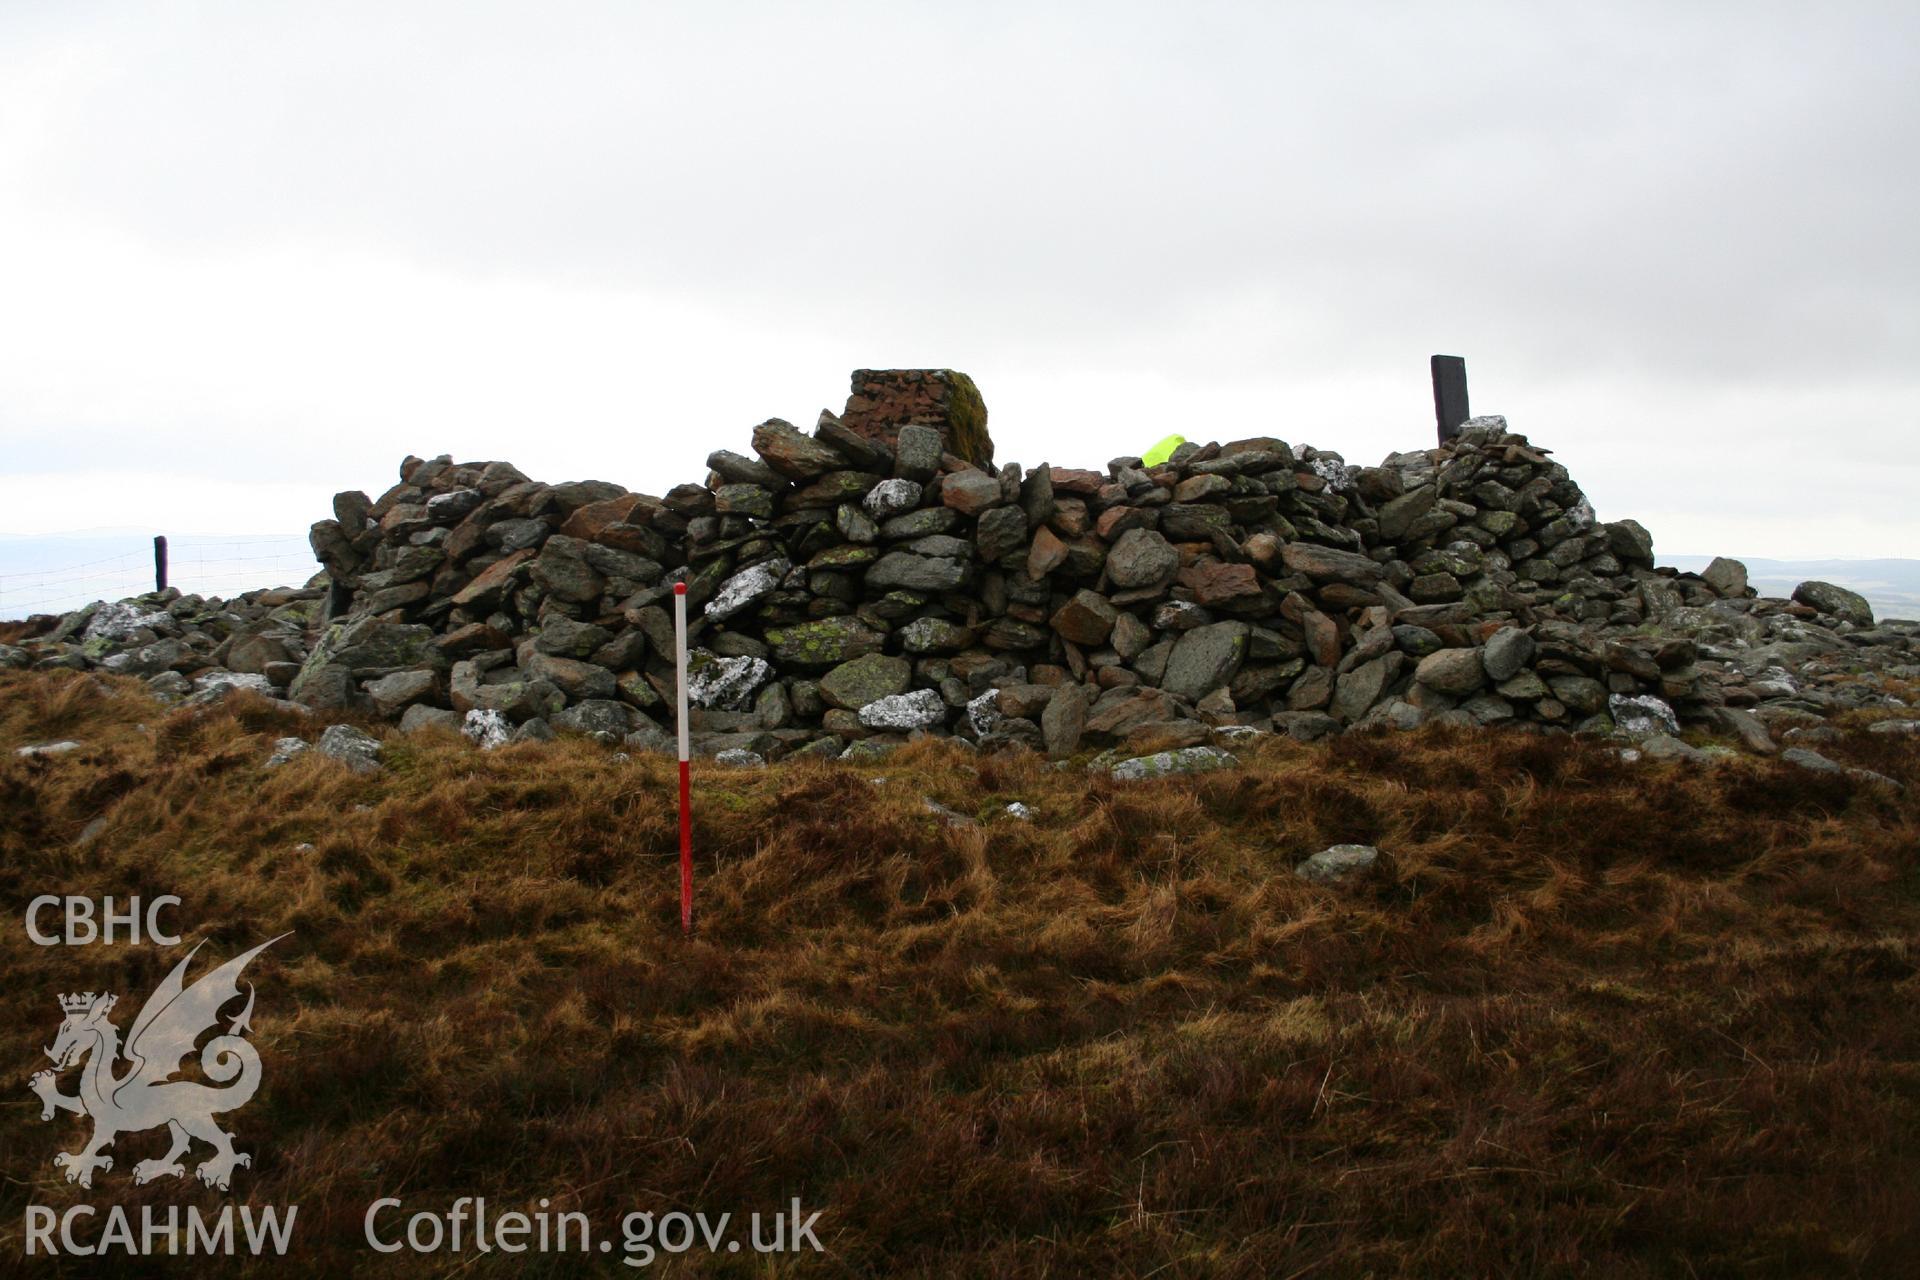 Digital Colour photograph of Carnedd y Filiast cairn taken on 15/01/2009 by P.J. Schofield during the Arenig Fach Upland Survey undertaken by Oxford Archaeology North.